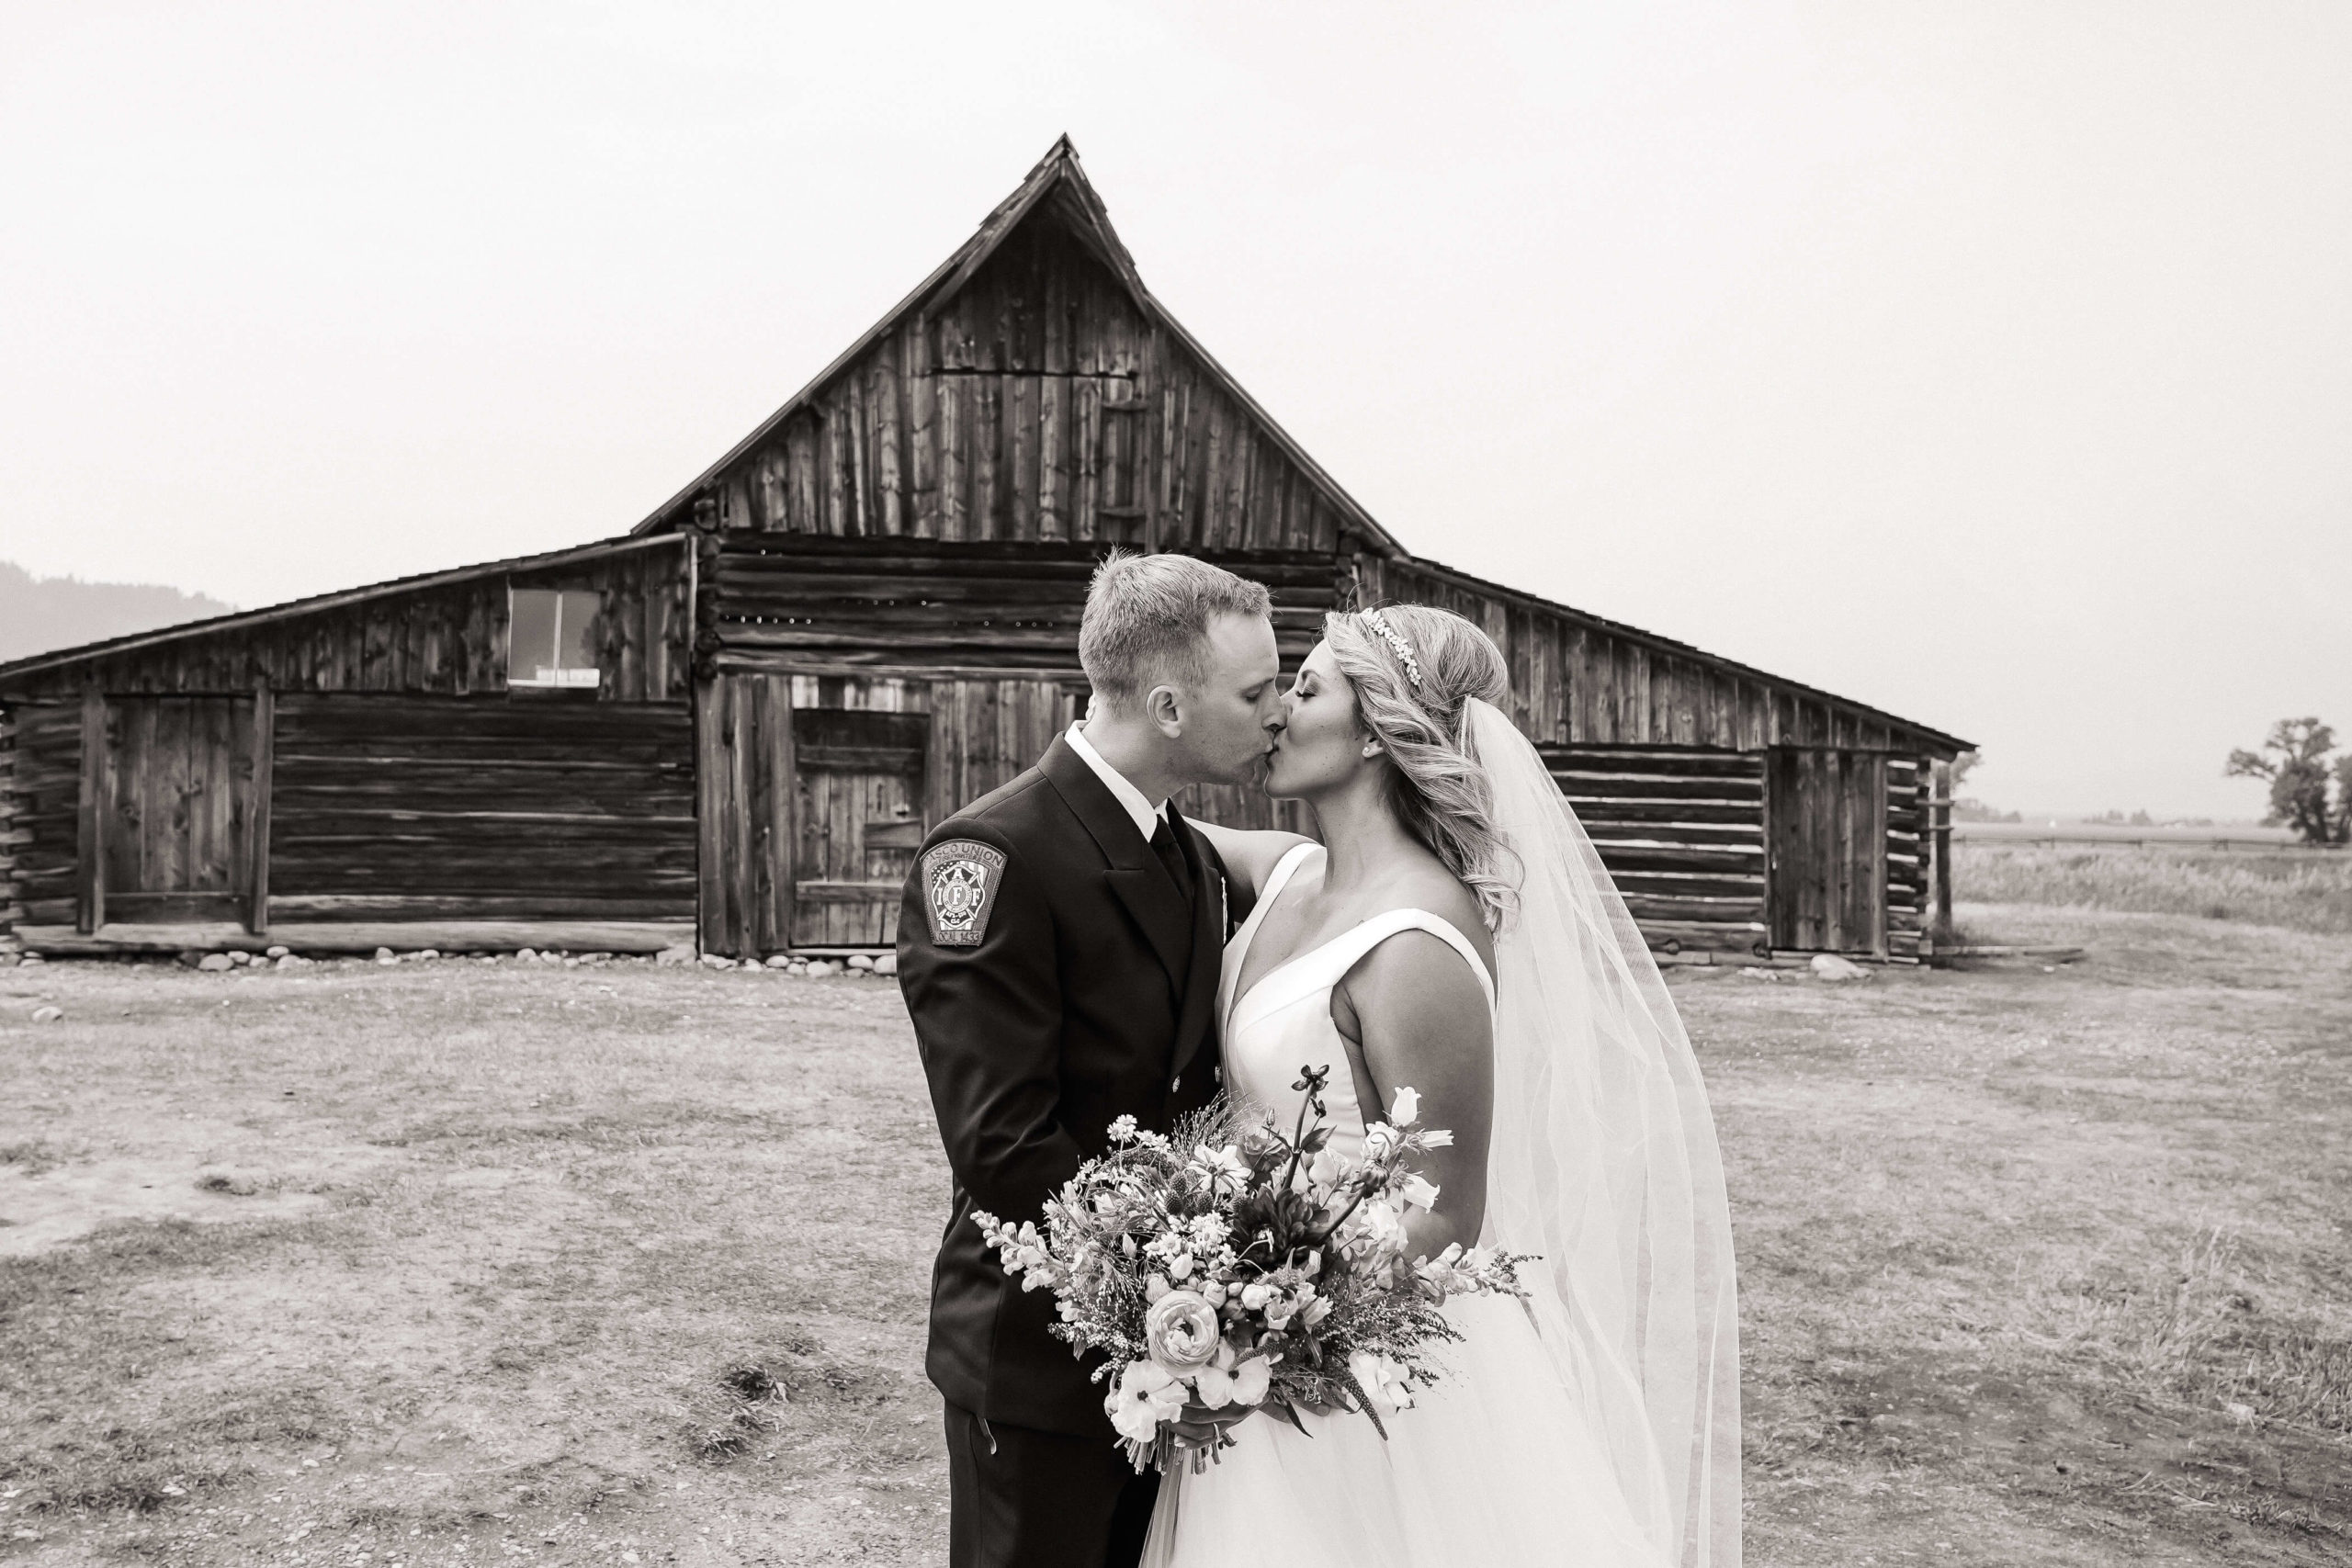 Bride and groom kiss in front of a barn in Jackson Hole, Wyoming